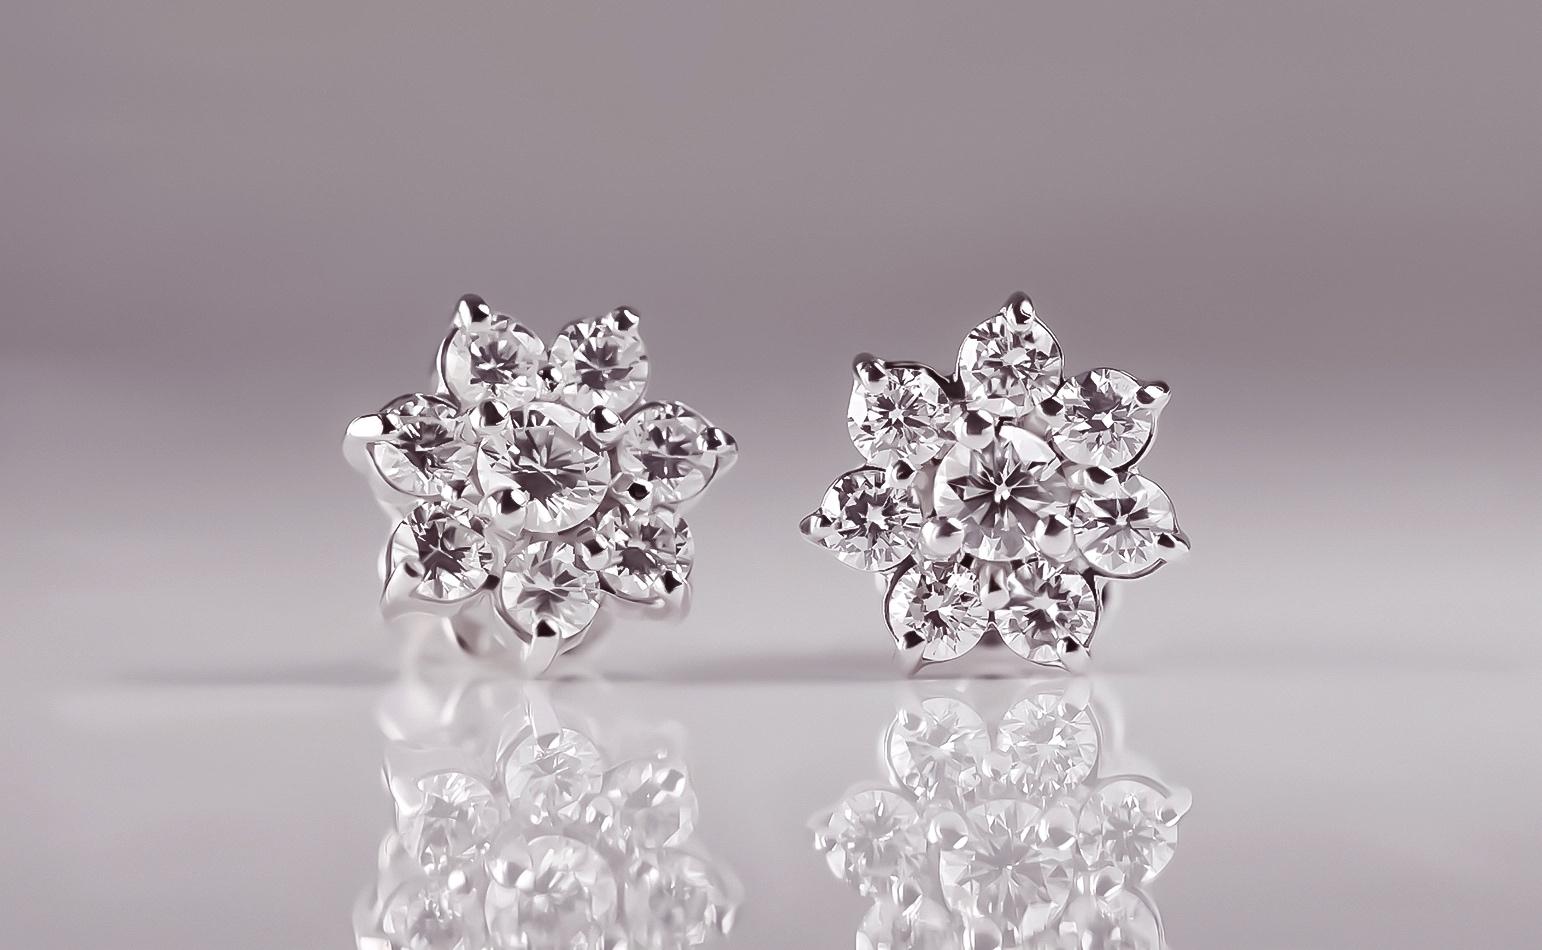 These delicate flower-shaped earrings embody effortless elegance. Crafted with care, every detail reflects beauty in its simplest form.

A central Diamond with a diameter of 3 mm captures light, surrounded by seven smaller Diamonds, each measuring